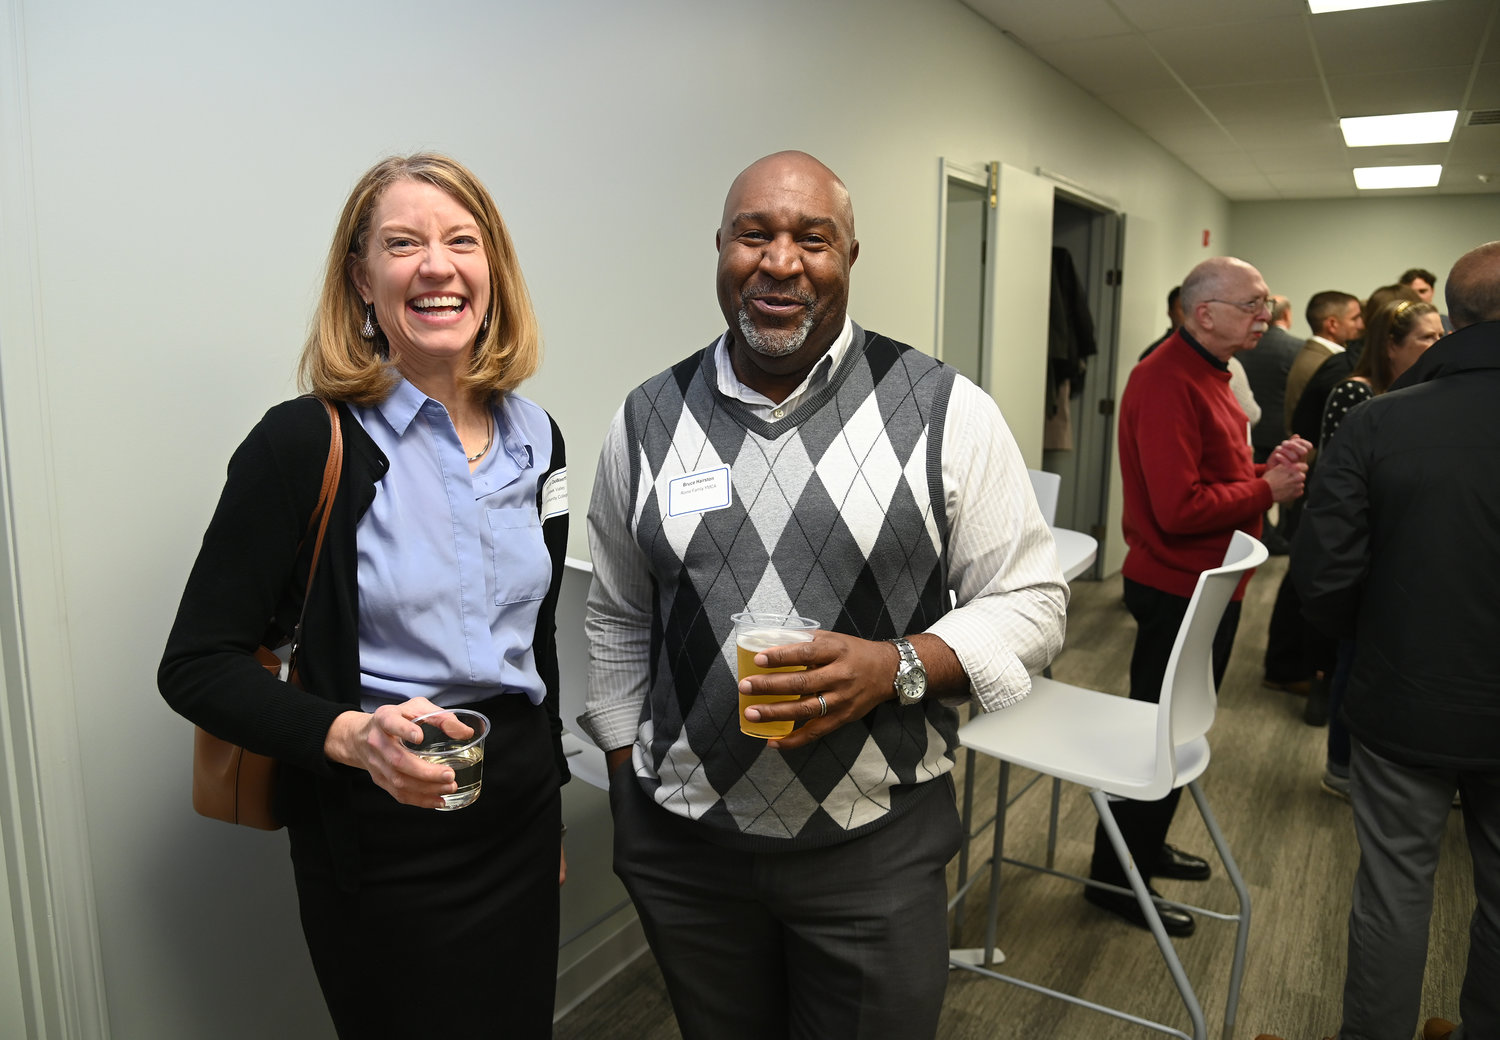 After hours chamber event at the Sentinel Media Co. Wednesday, Nov. 30, 2022.